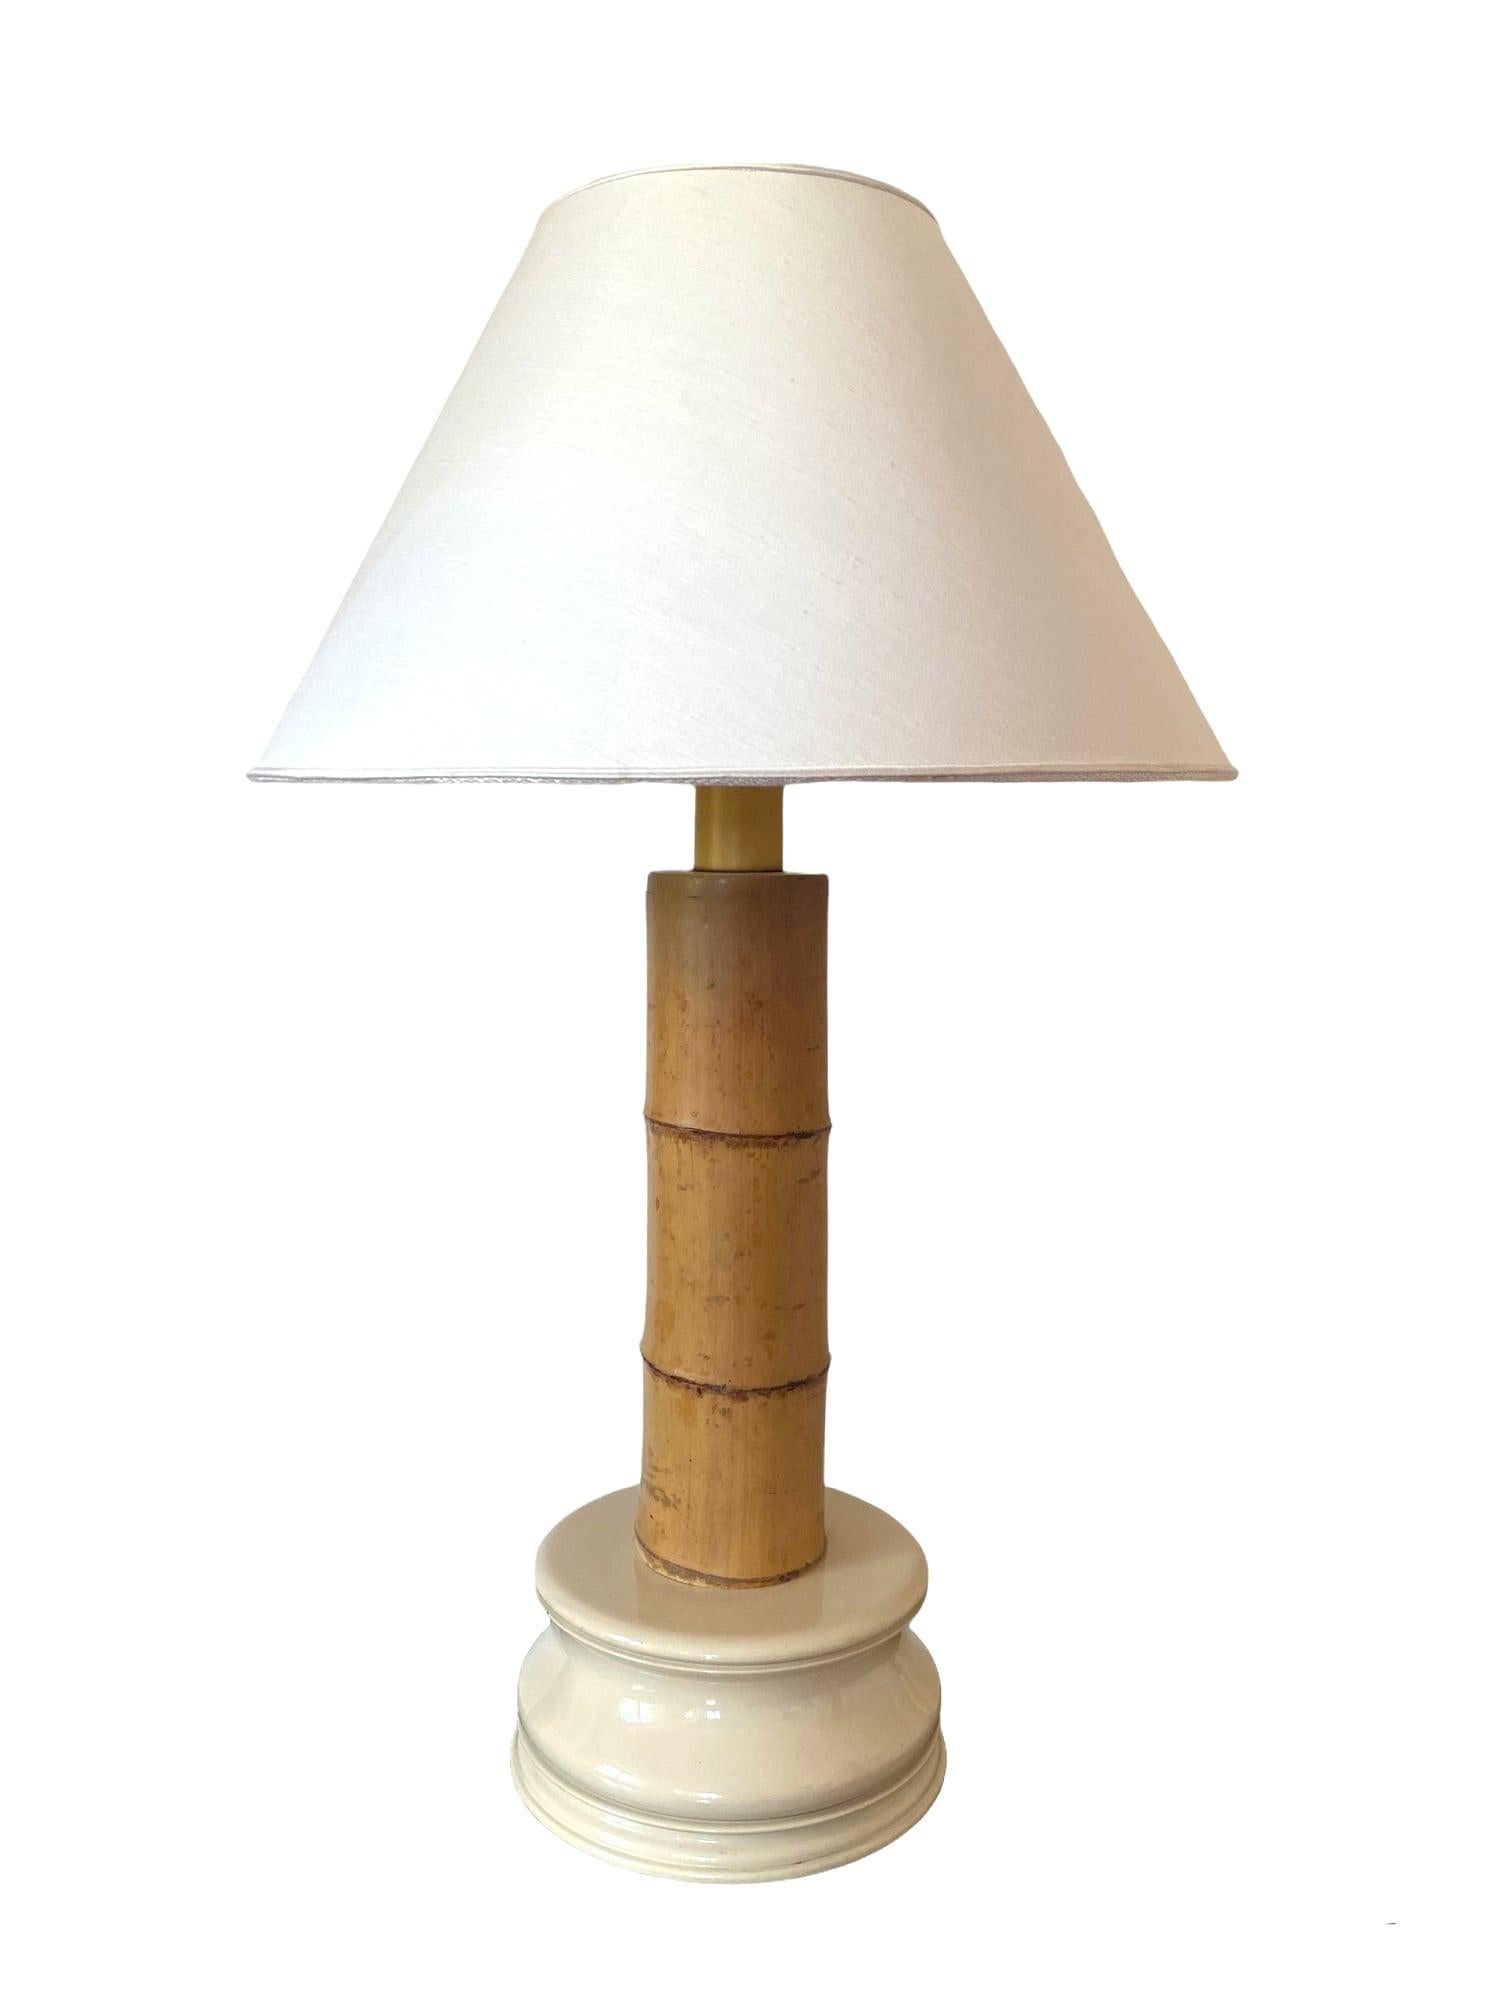 Fabric Hollywood Regency Great Bamboo Table Lamp, RCM 1867 Italy, 1970s For Sale